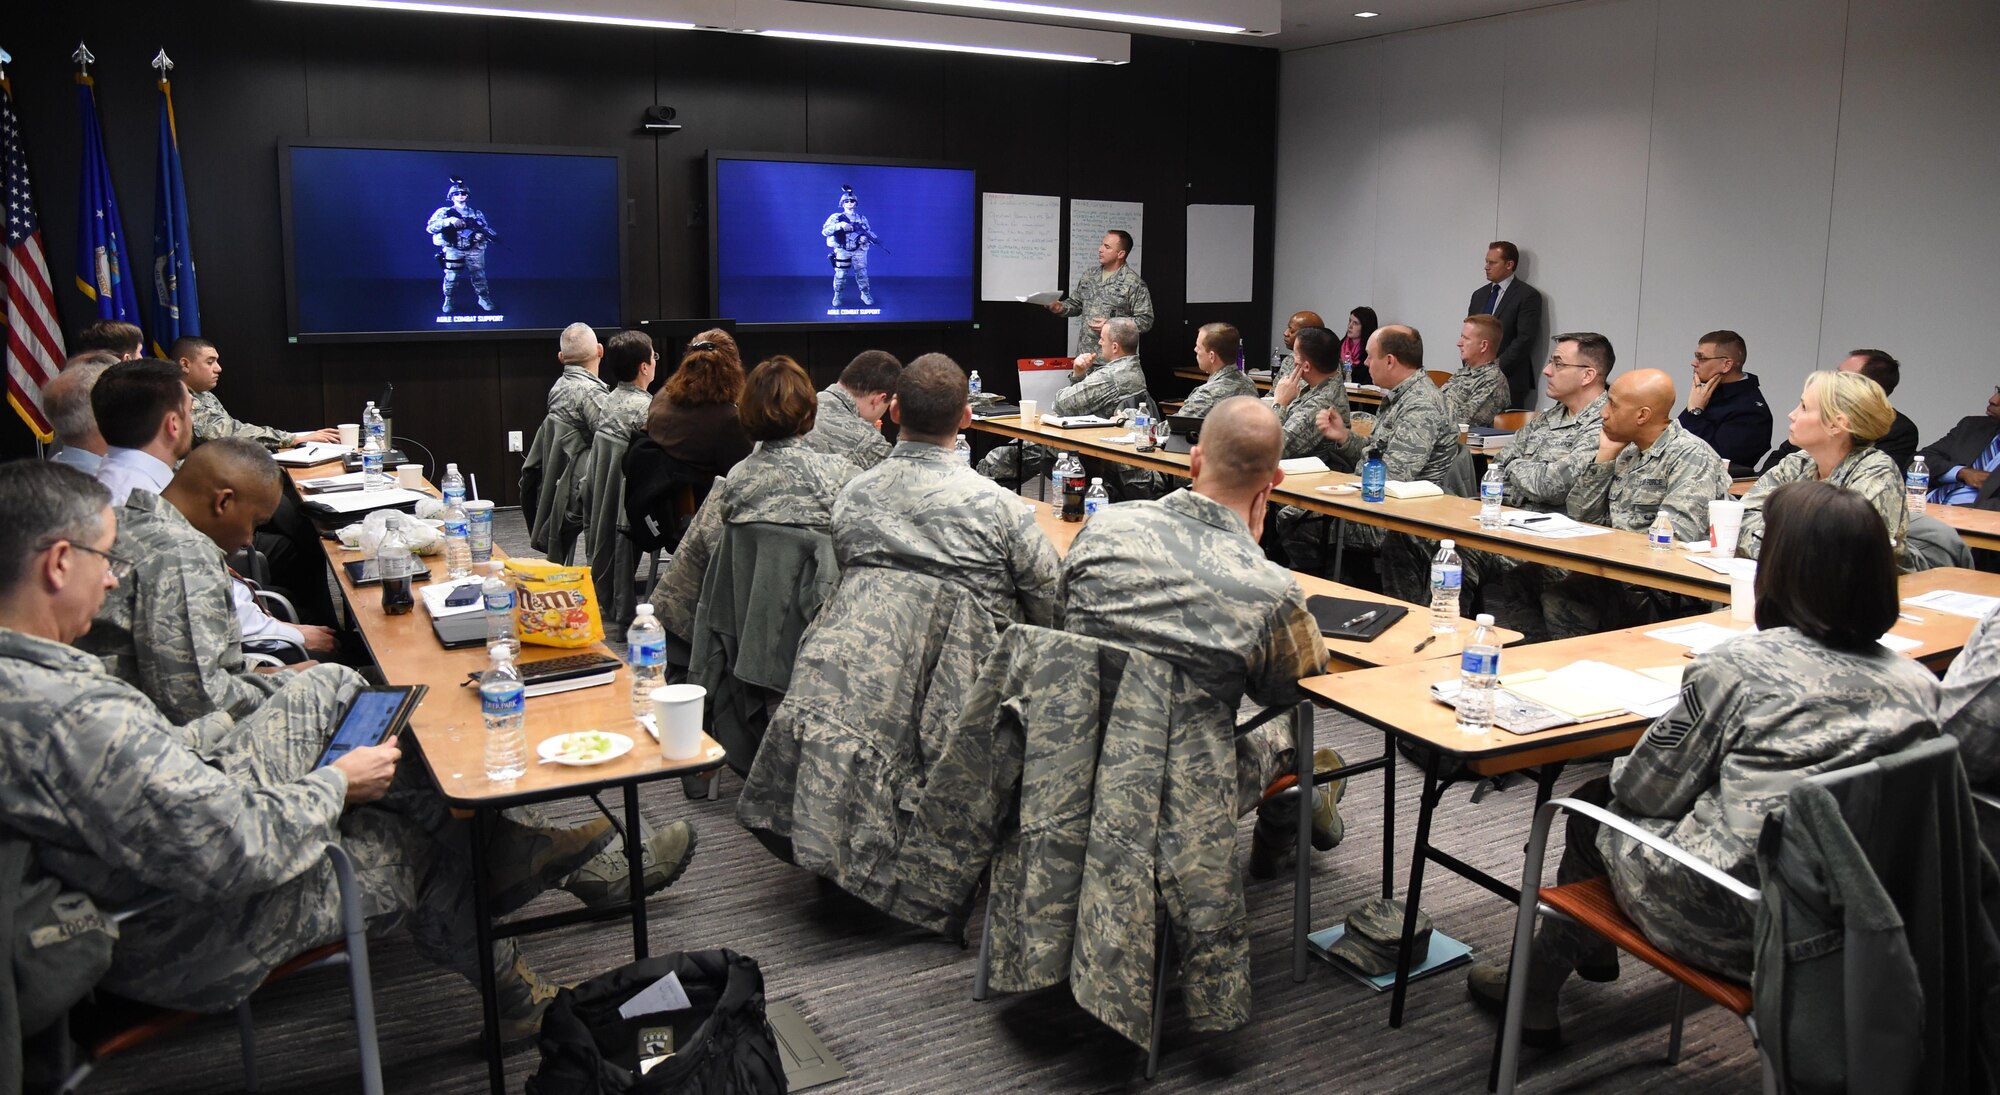 Col. Chris Bargery, commander of the Air Force Security Forces Center, provides a mission briefing about his unit to attendees of the AFIMSC leadership meeting Feb. 12 at Joint Base Andrews, Maryland. (U.S. Air Force photo by Airman 1st Class Philip Bryant)